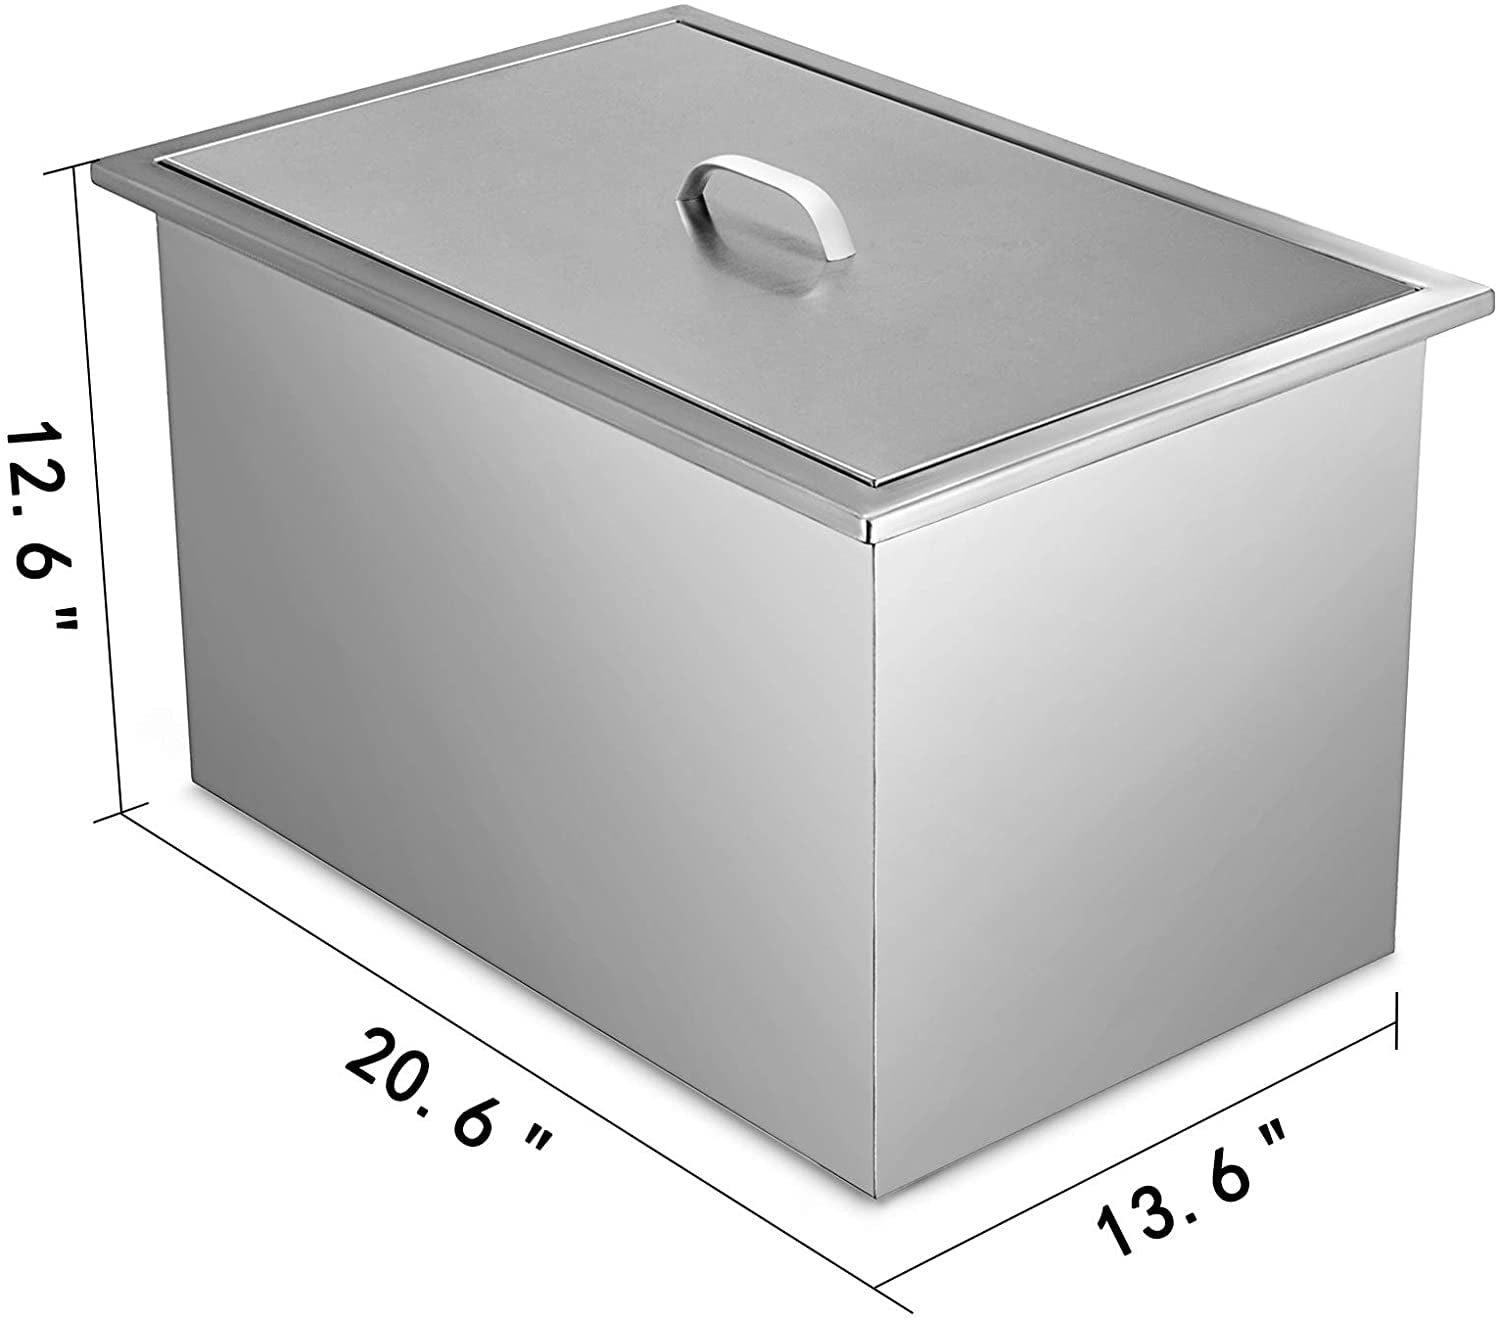 23 x 17 x 12 KITGARN Drop-in Ice Chest with Sliding Cover Stainless Steel Single Ice Chest Cooler Insulated Wall Wine Cooler Drop in Cooler 23 x 17 x 12 for Wine Beer Juice